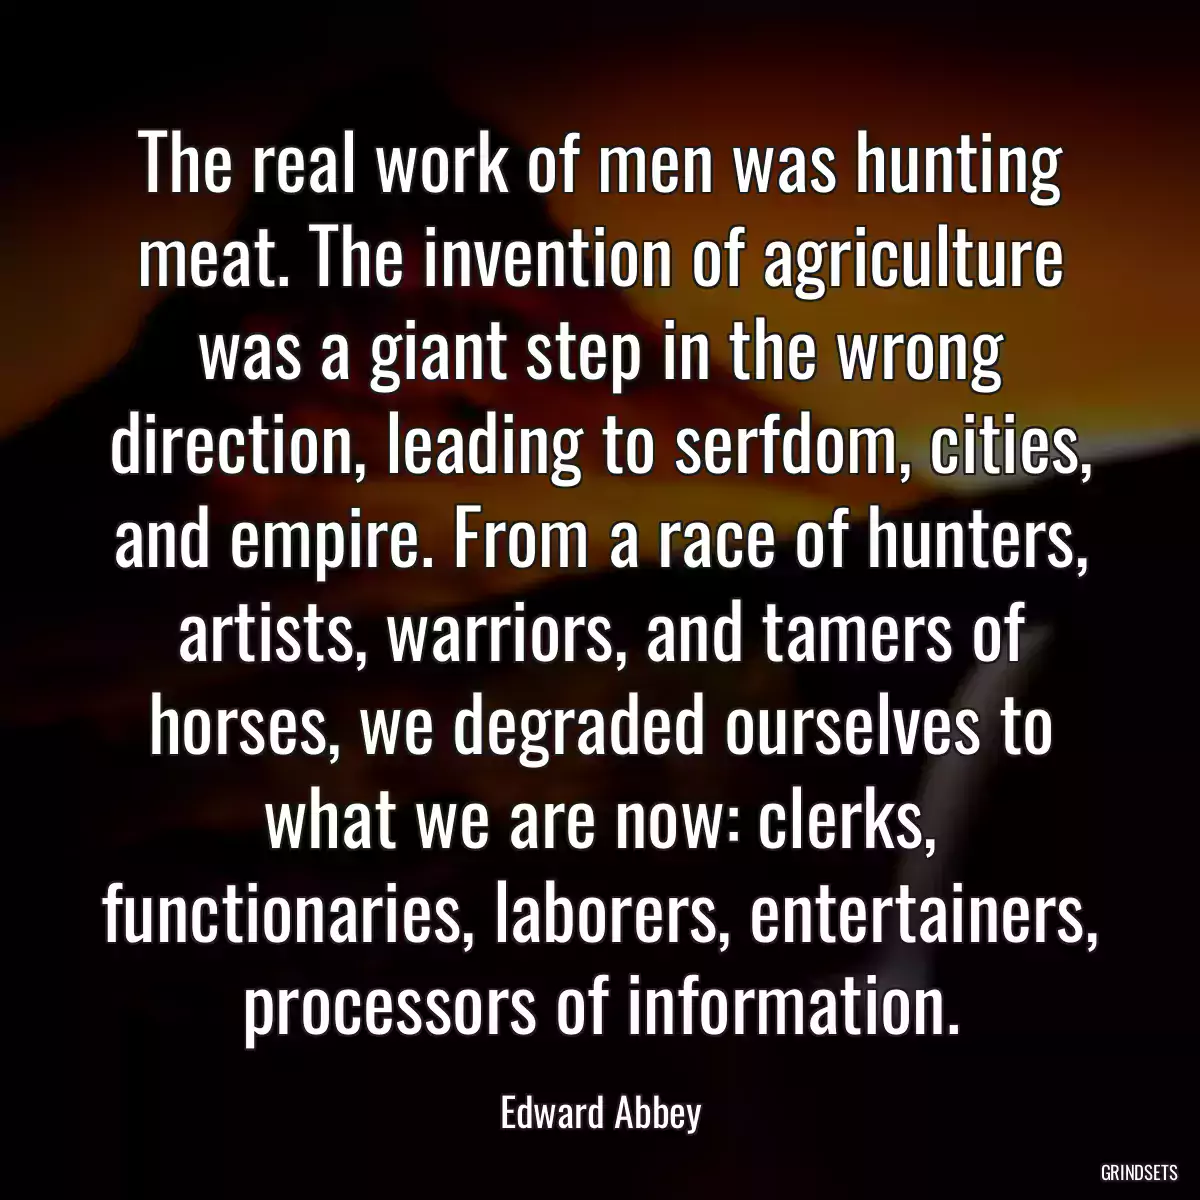 The real work of men was hunting meat. The invention of agriculture was a giant step in the wrong direction, leading to serfdom, cities, and empire. From a race of hunters, artists, warriors, and tamers of horses, we degraded ourselves to what we are now: clerks, functionaries, laborers, entertainers, processors of information.